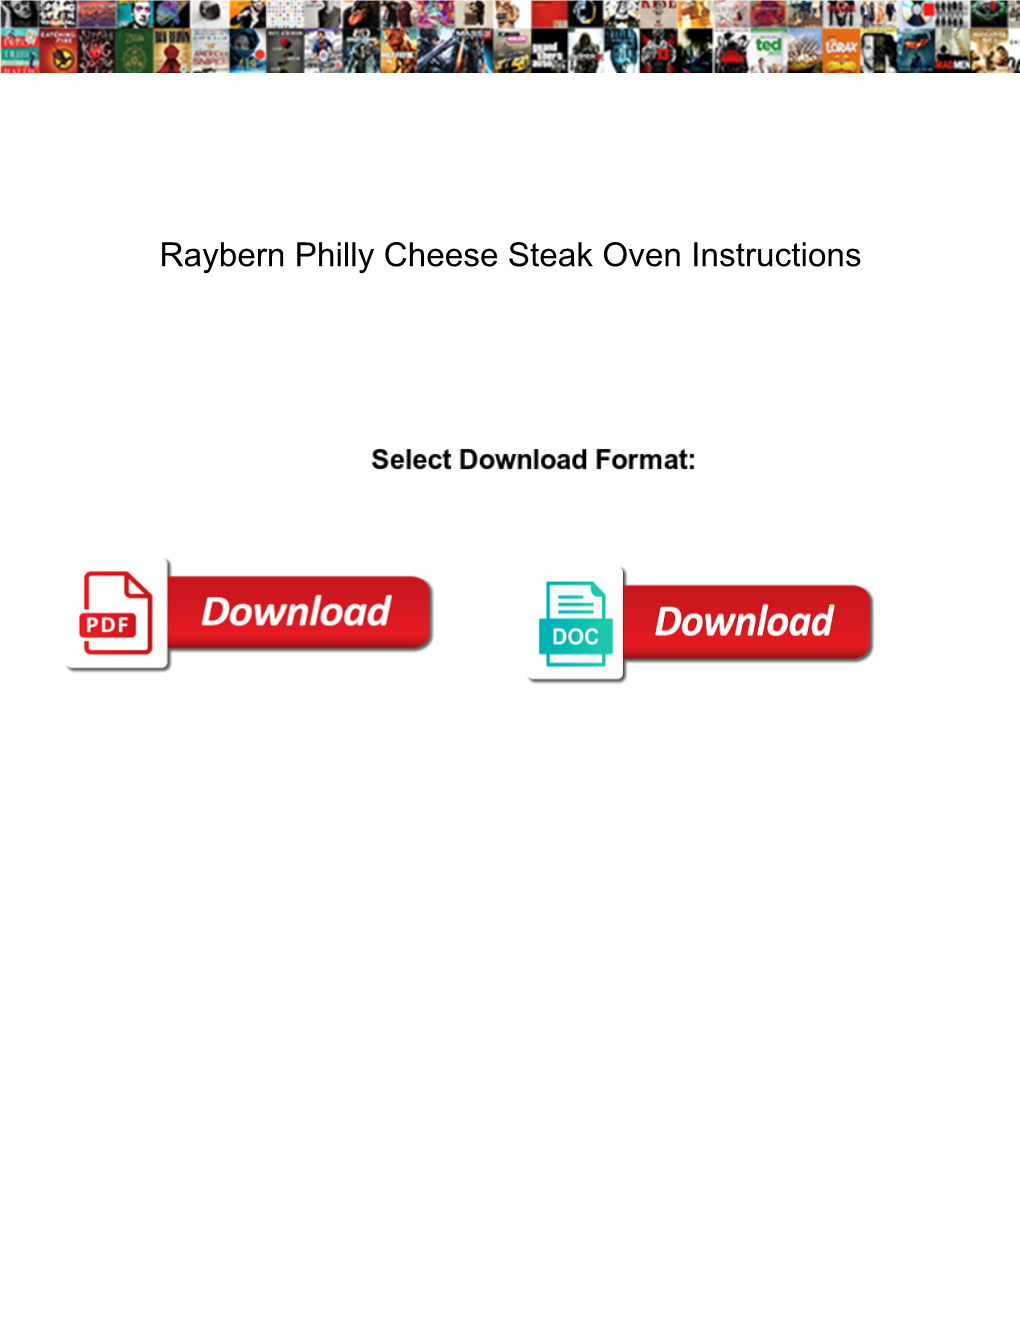 Raybern Philly Cheese Steak Oven Instructions